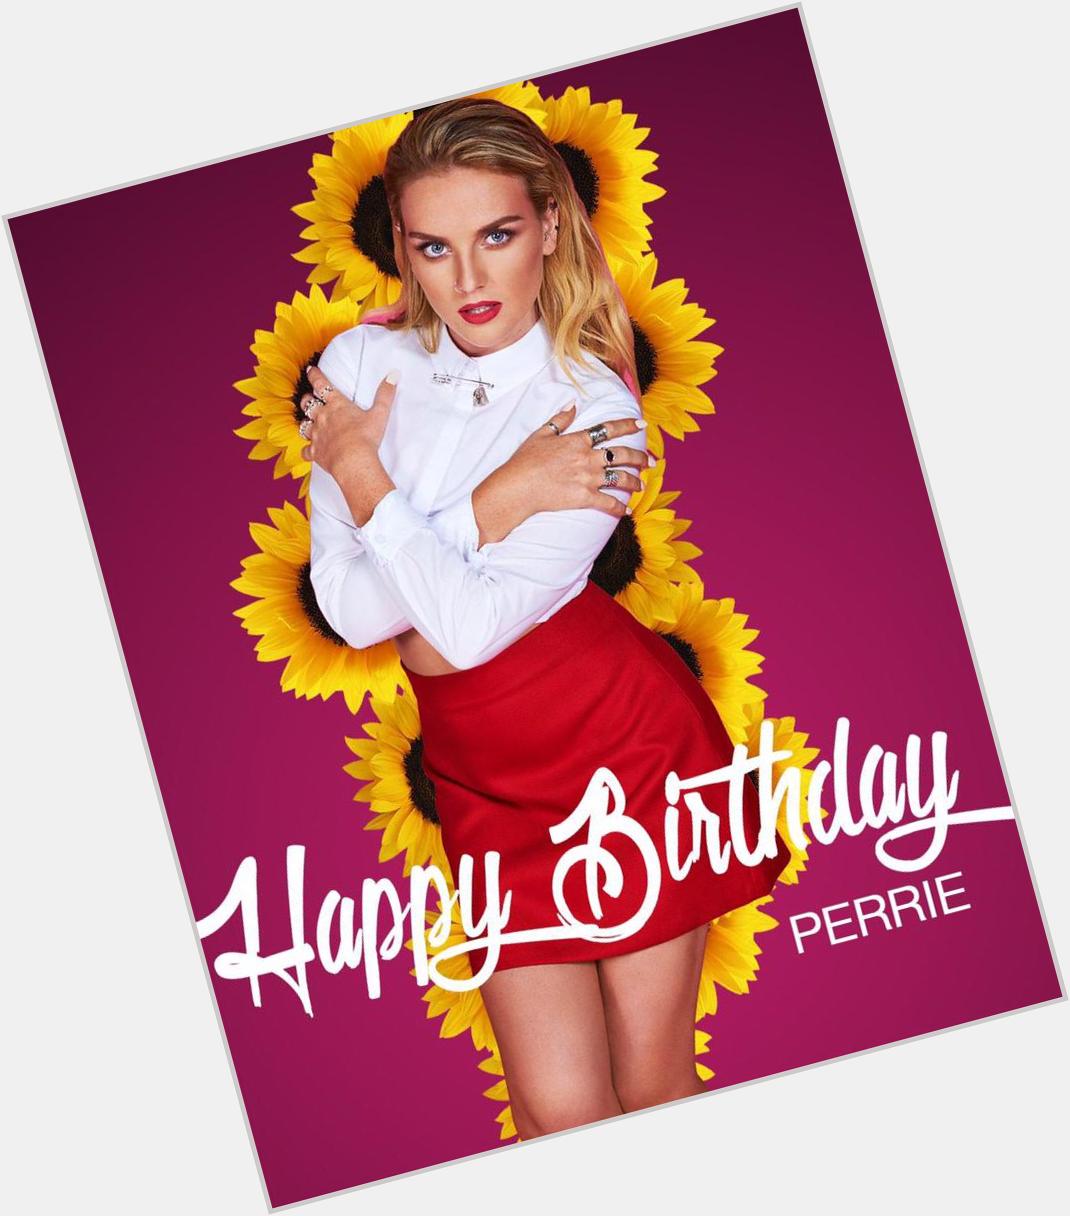 Happy birthday Perrie Edwards, we love you!   and Black Magic is WHOO!! 